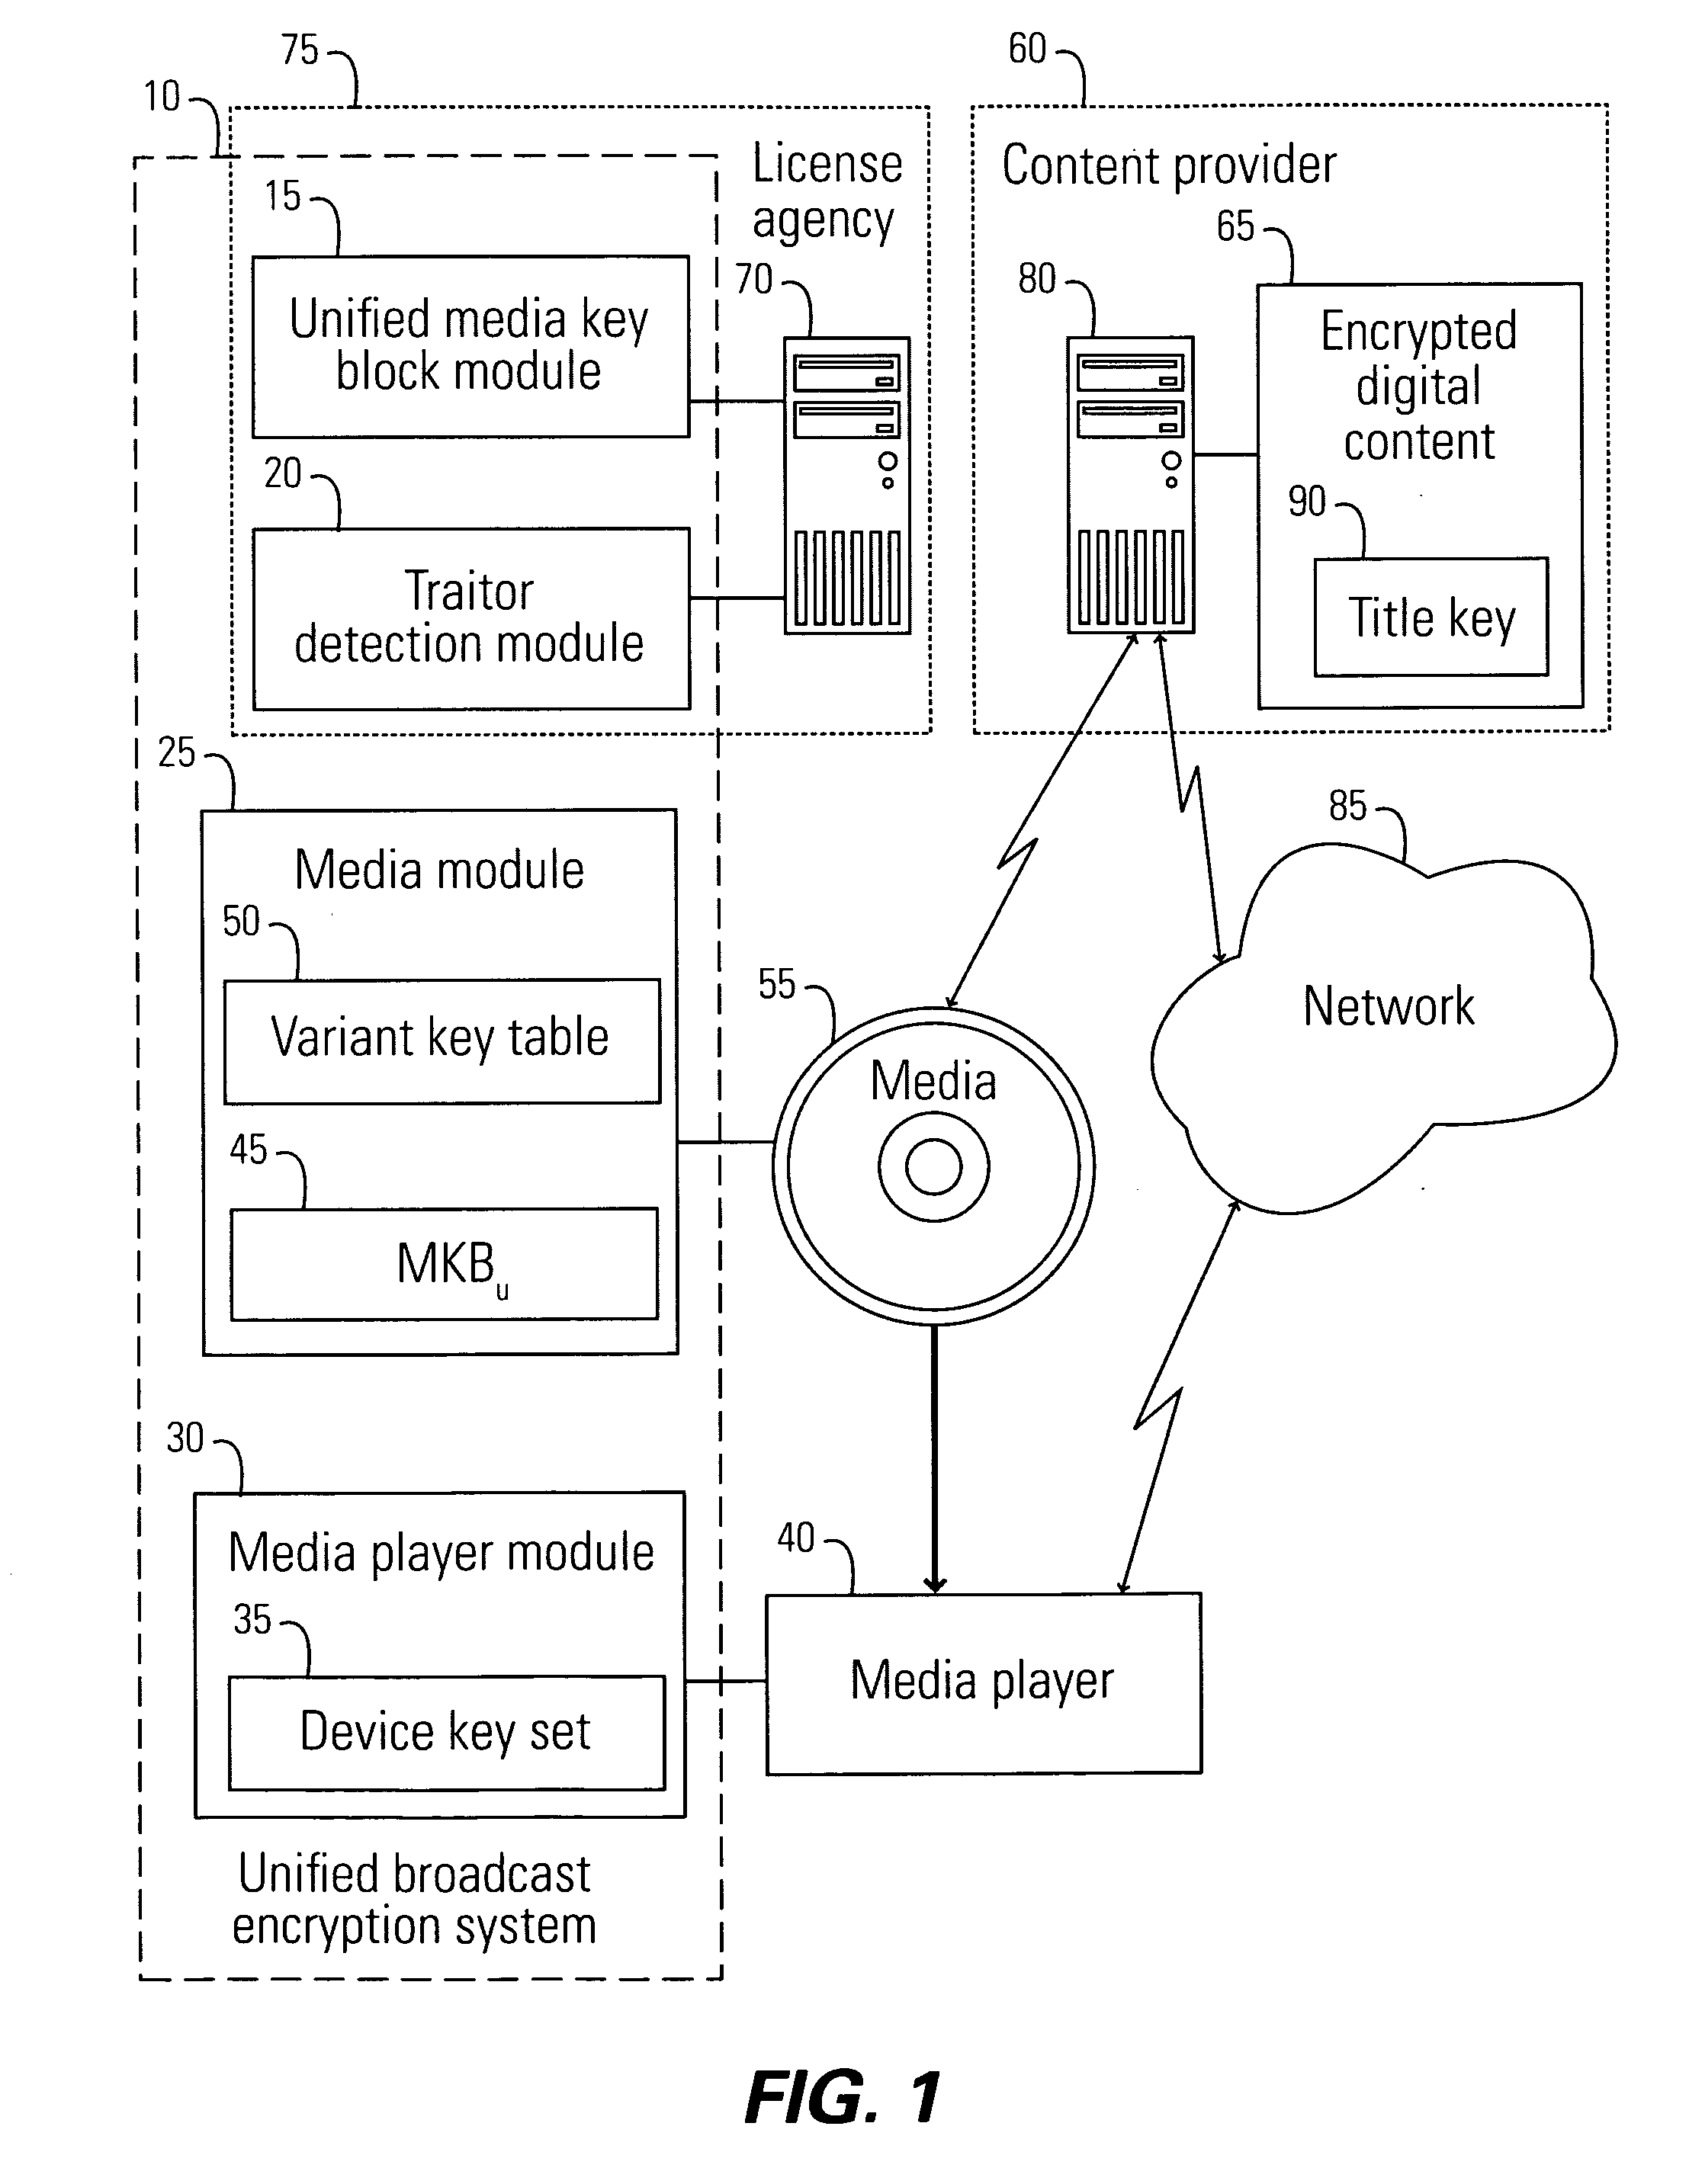 Unified broadcast encryption system